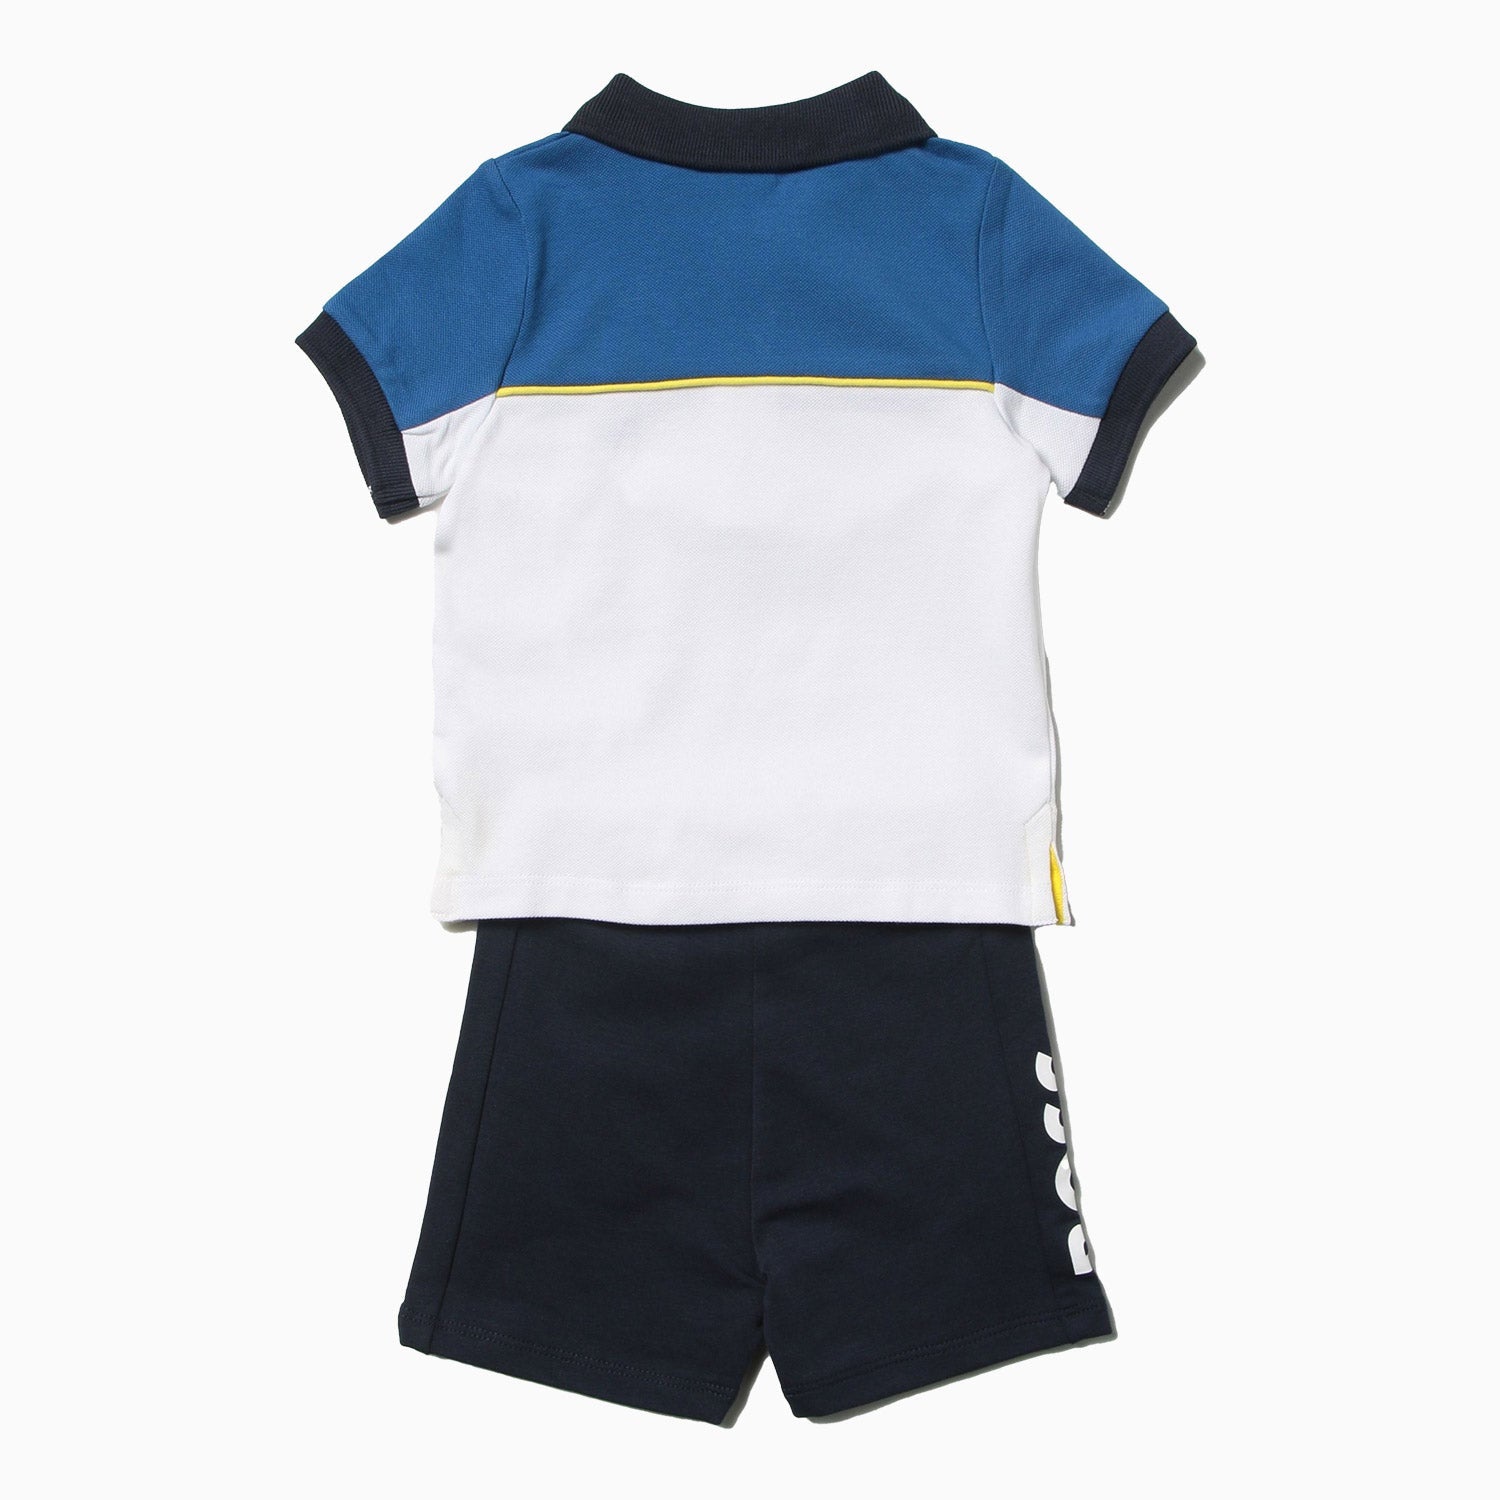 Hugo Boss Kid's Polo Outfit - Color: China Grey, Navy - Kids Premium Clothing -